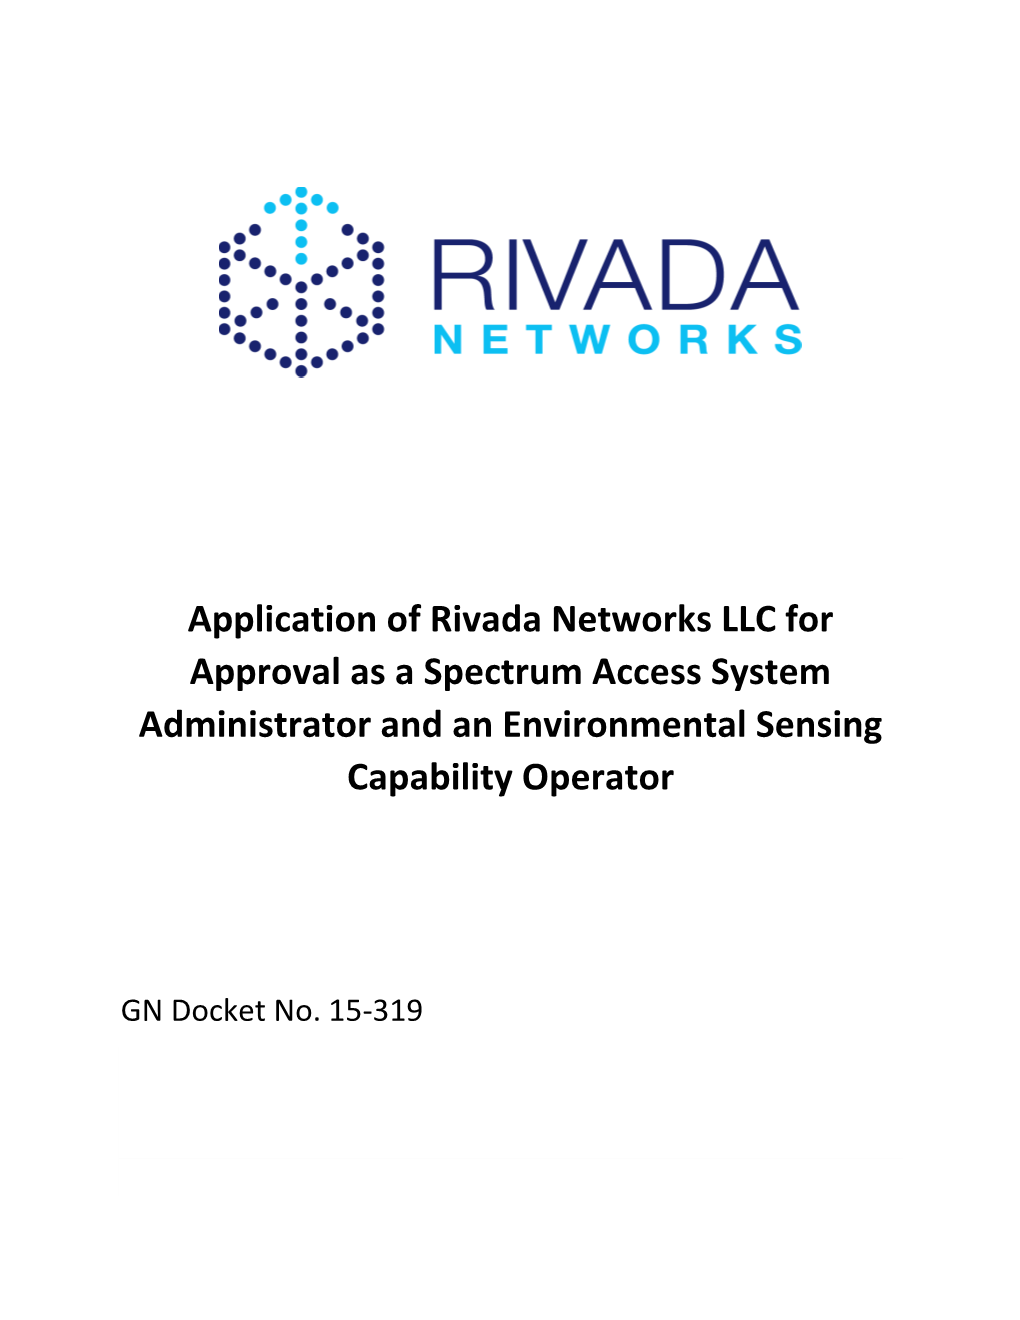 Application of Rivada Networks LLC for Approval As a Spectrum Access System Administrator and an Environmental Sensing Capability Operator